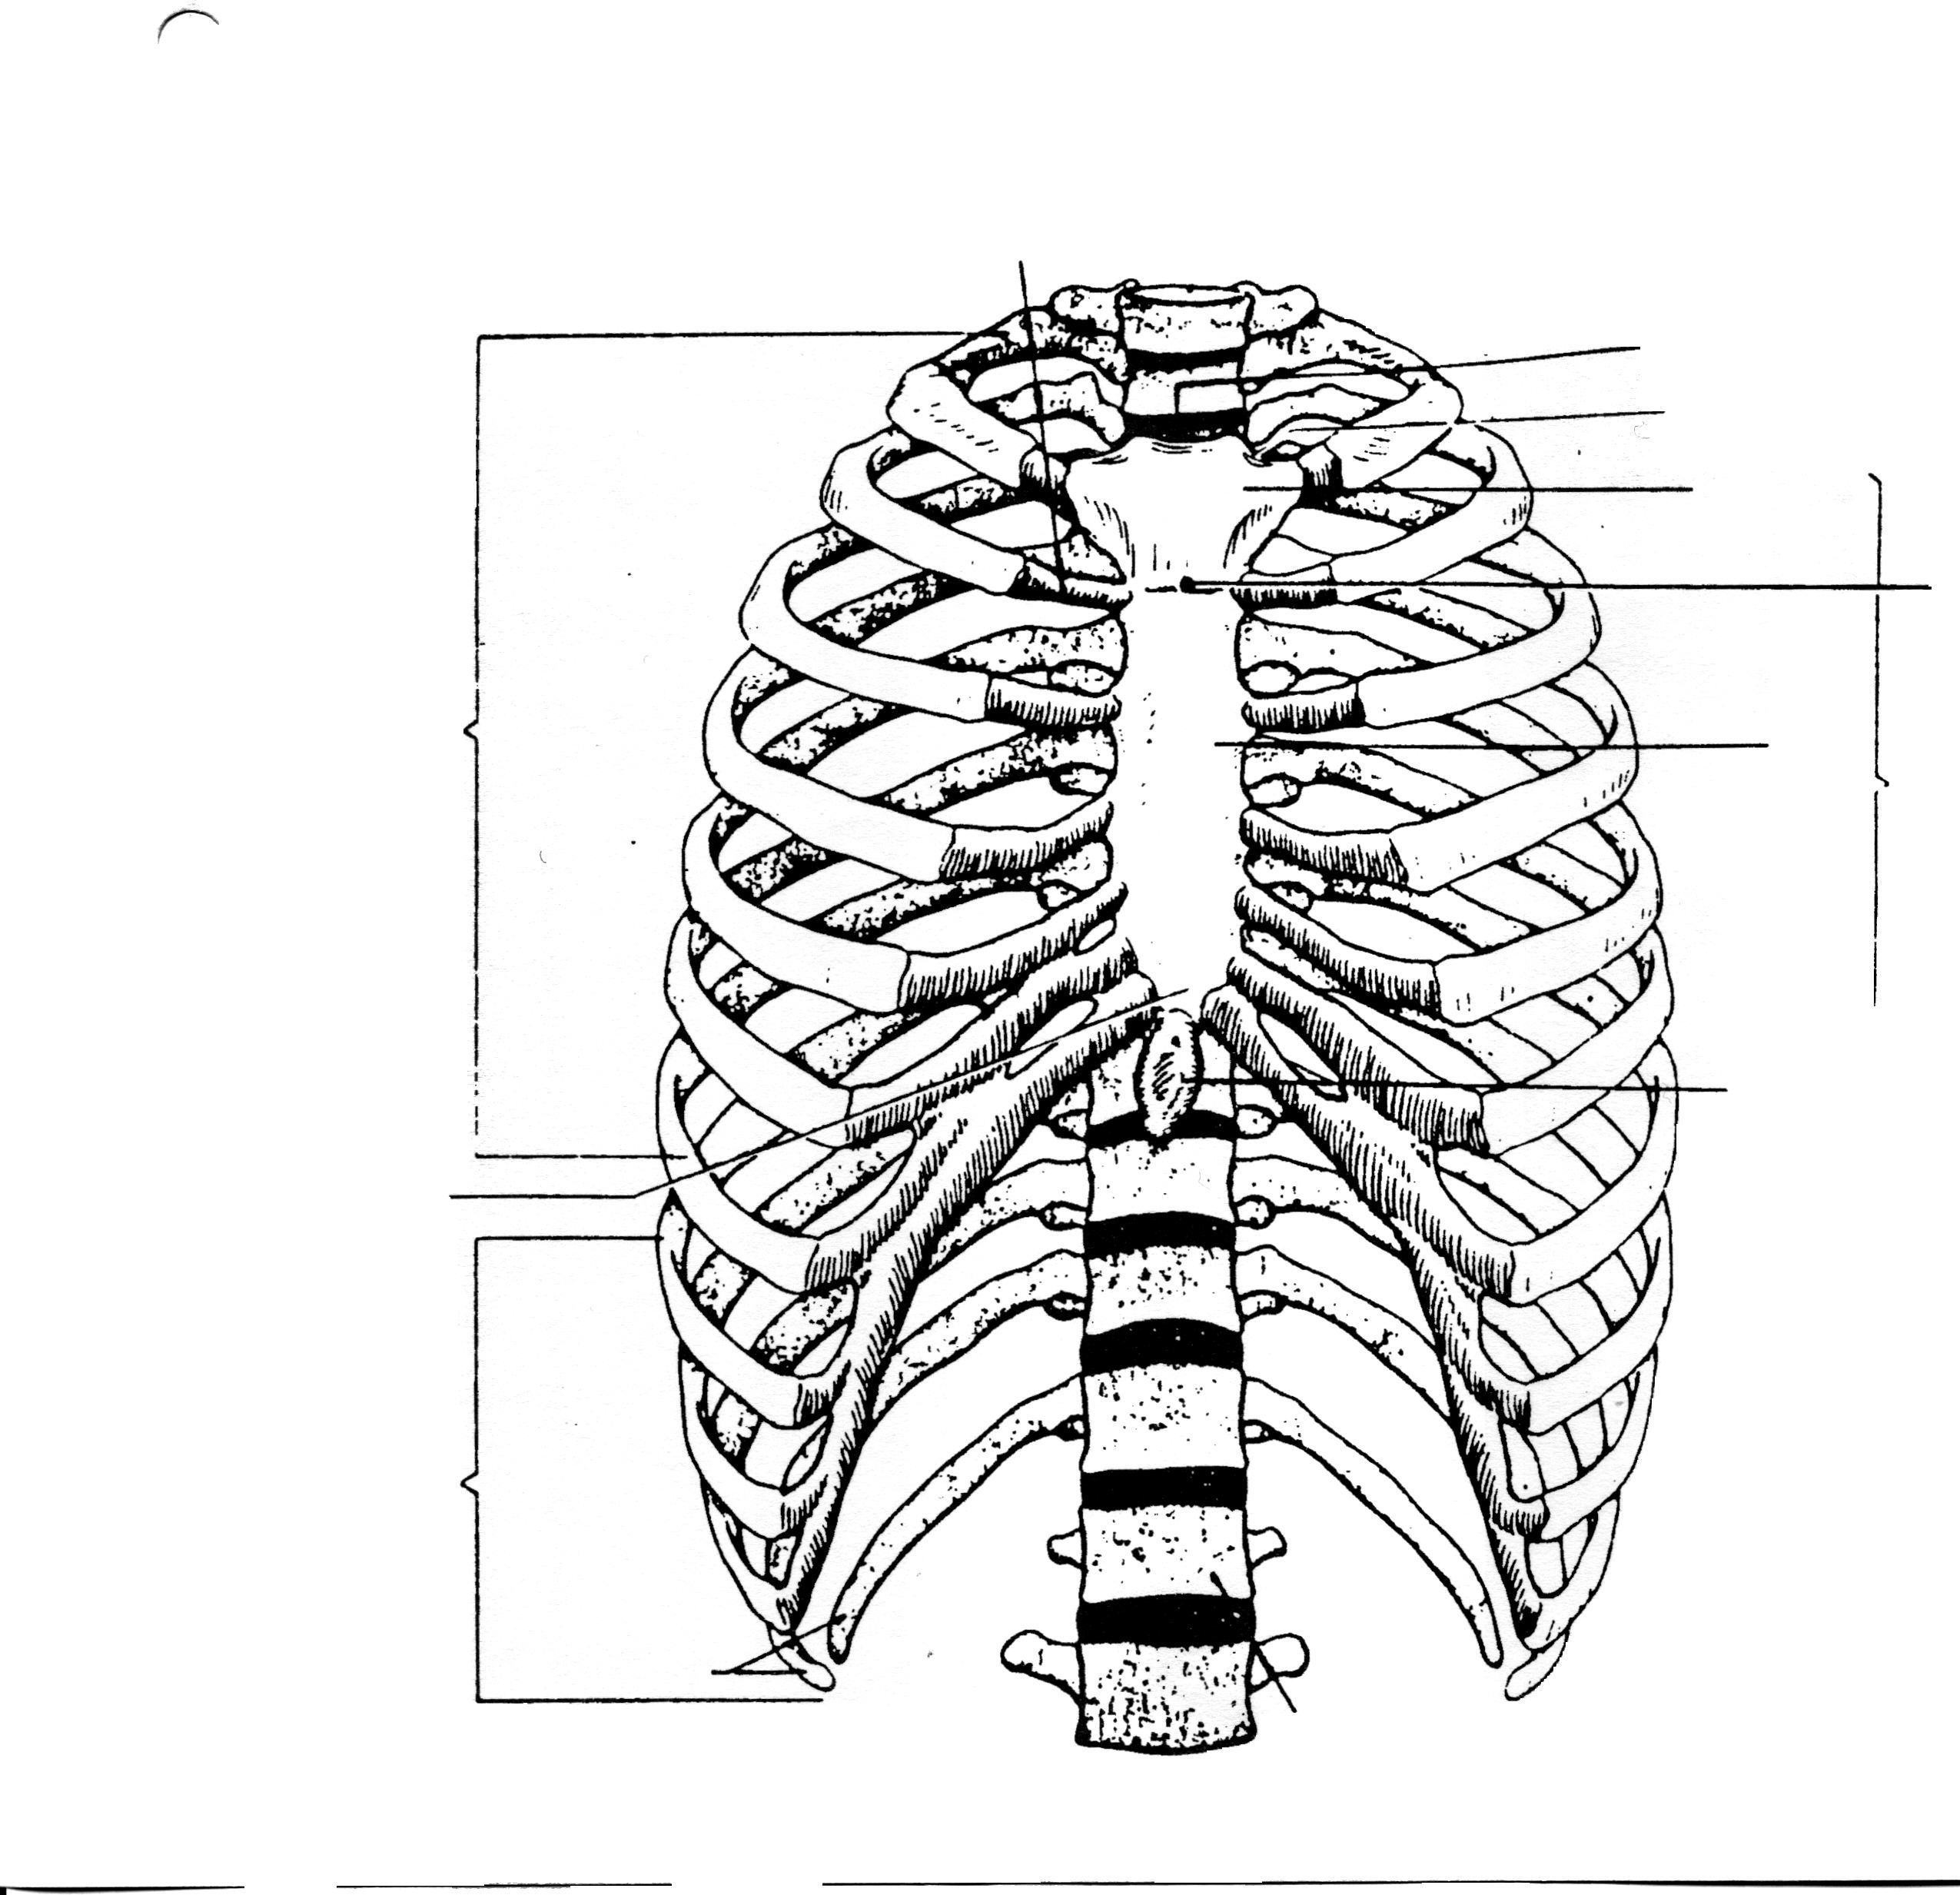 Anatomy And Physiology Coloring Pages - Coloring Pages For All Ages